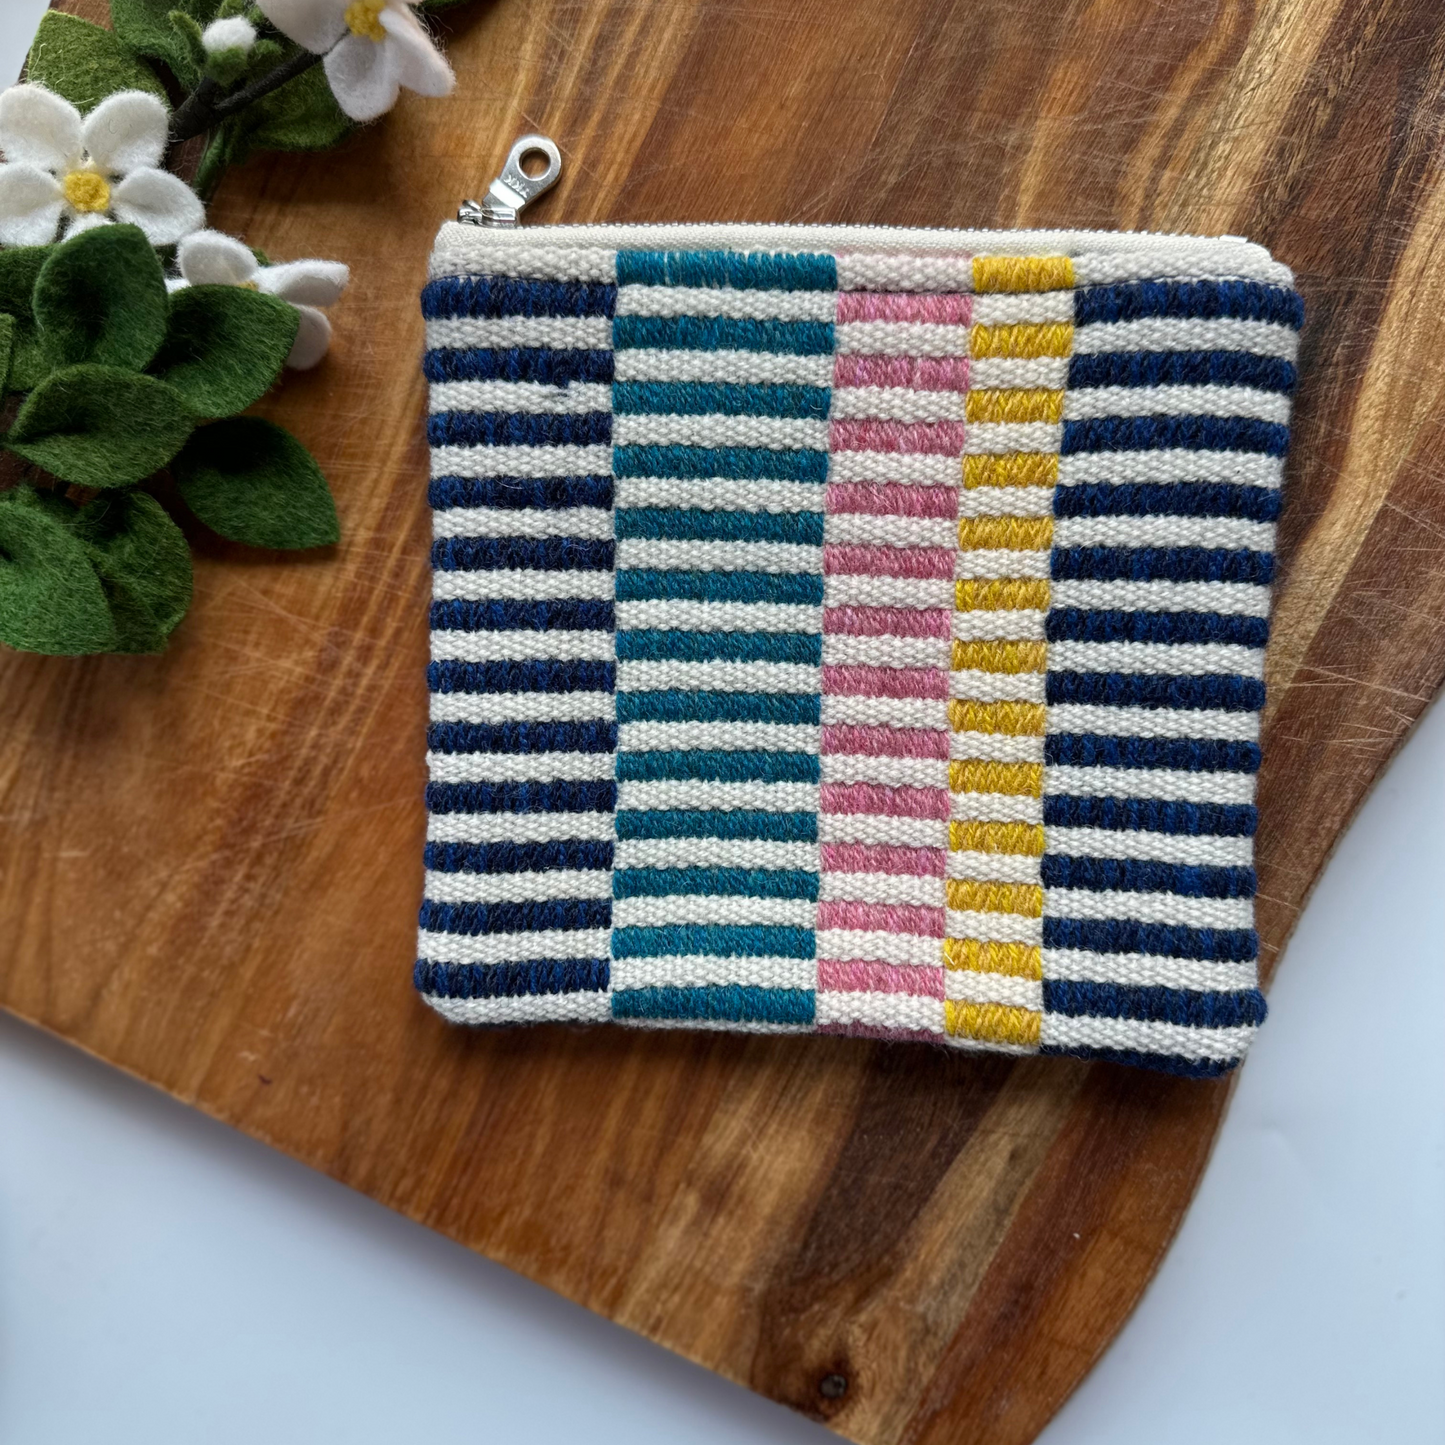 Blue, Yellow, Turquoise and Pink Striped Handwoven Zipper Purse